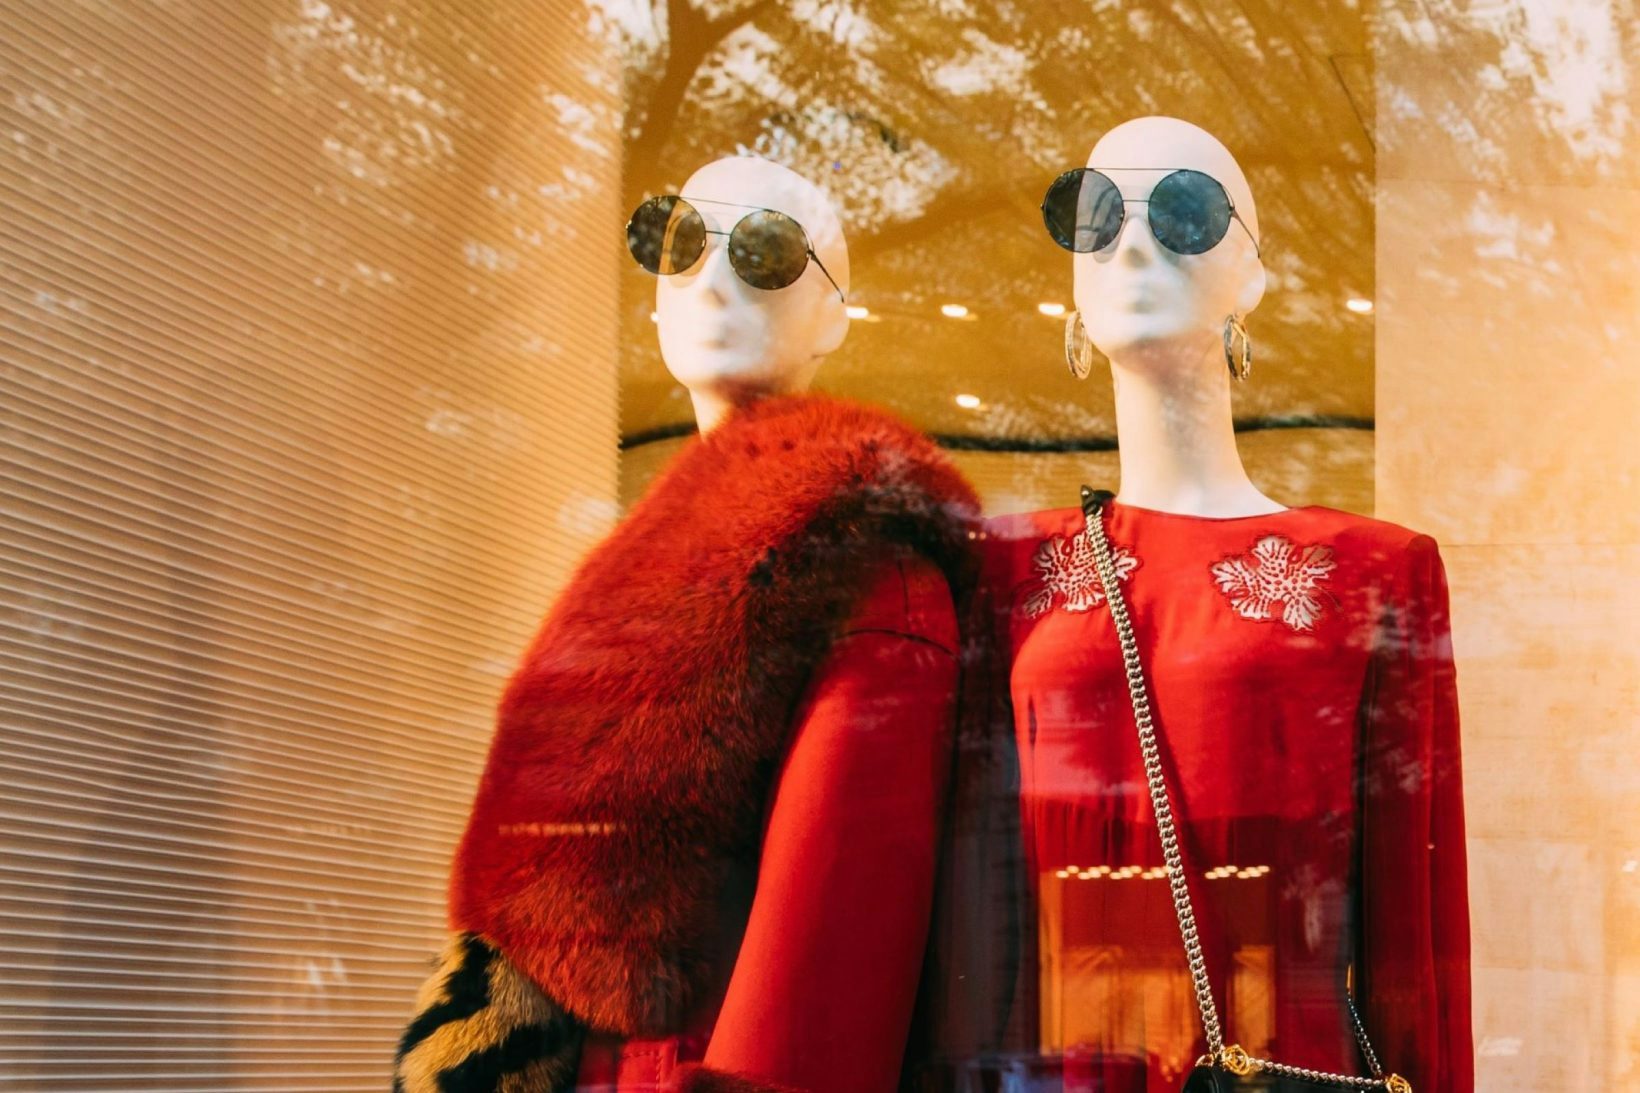 According to Bain & Co, the Personal Luxury Goods market is set to slow, with growth of between 1% and 4% in 2024